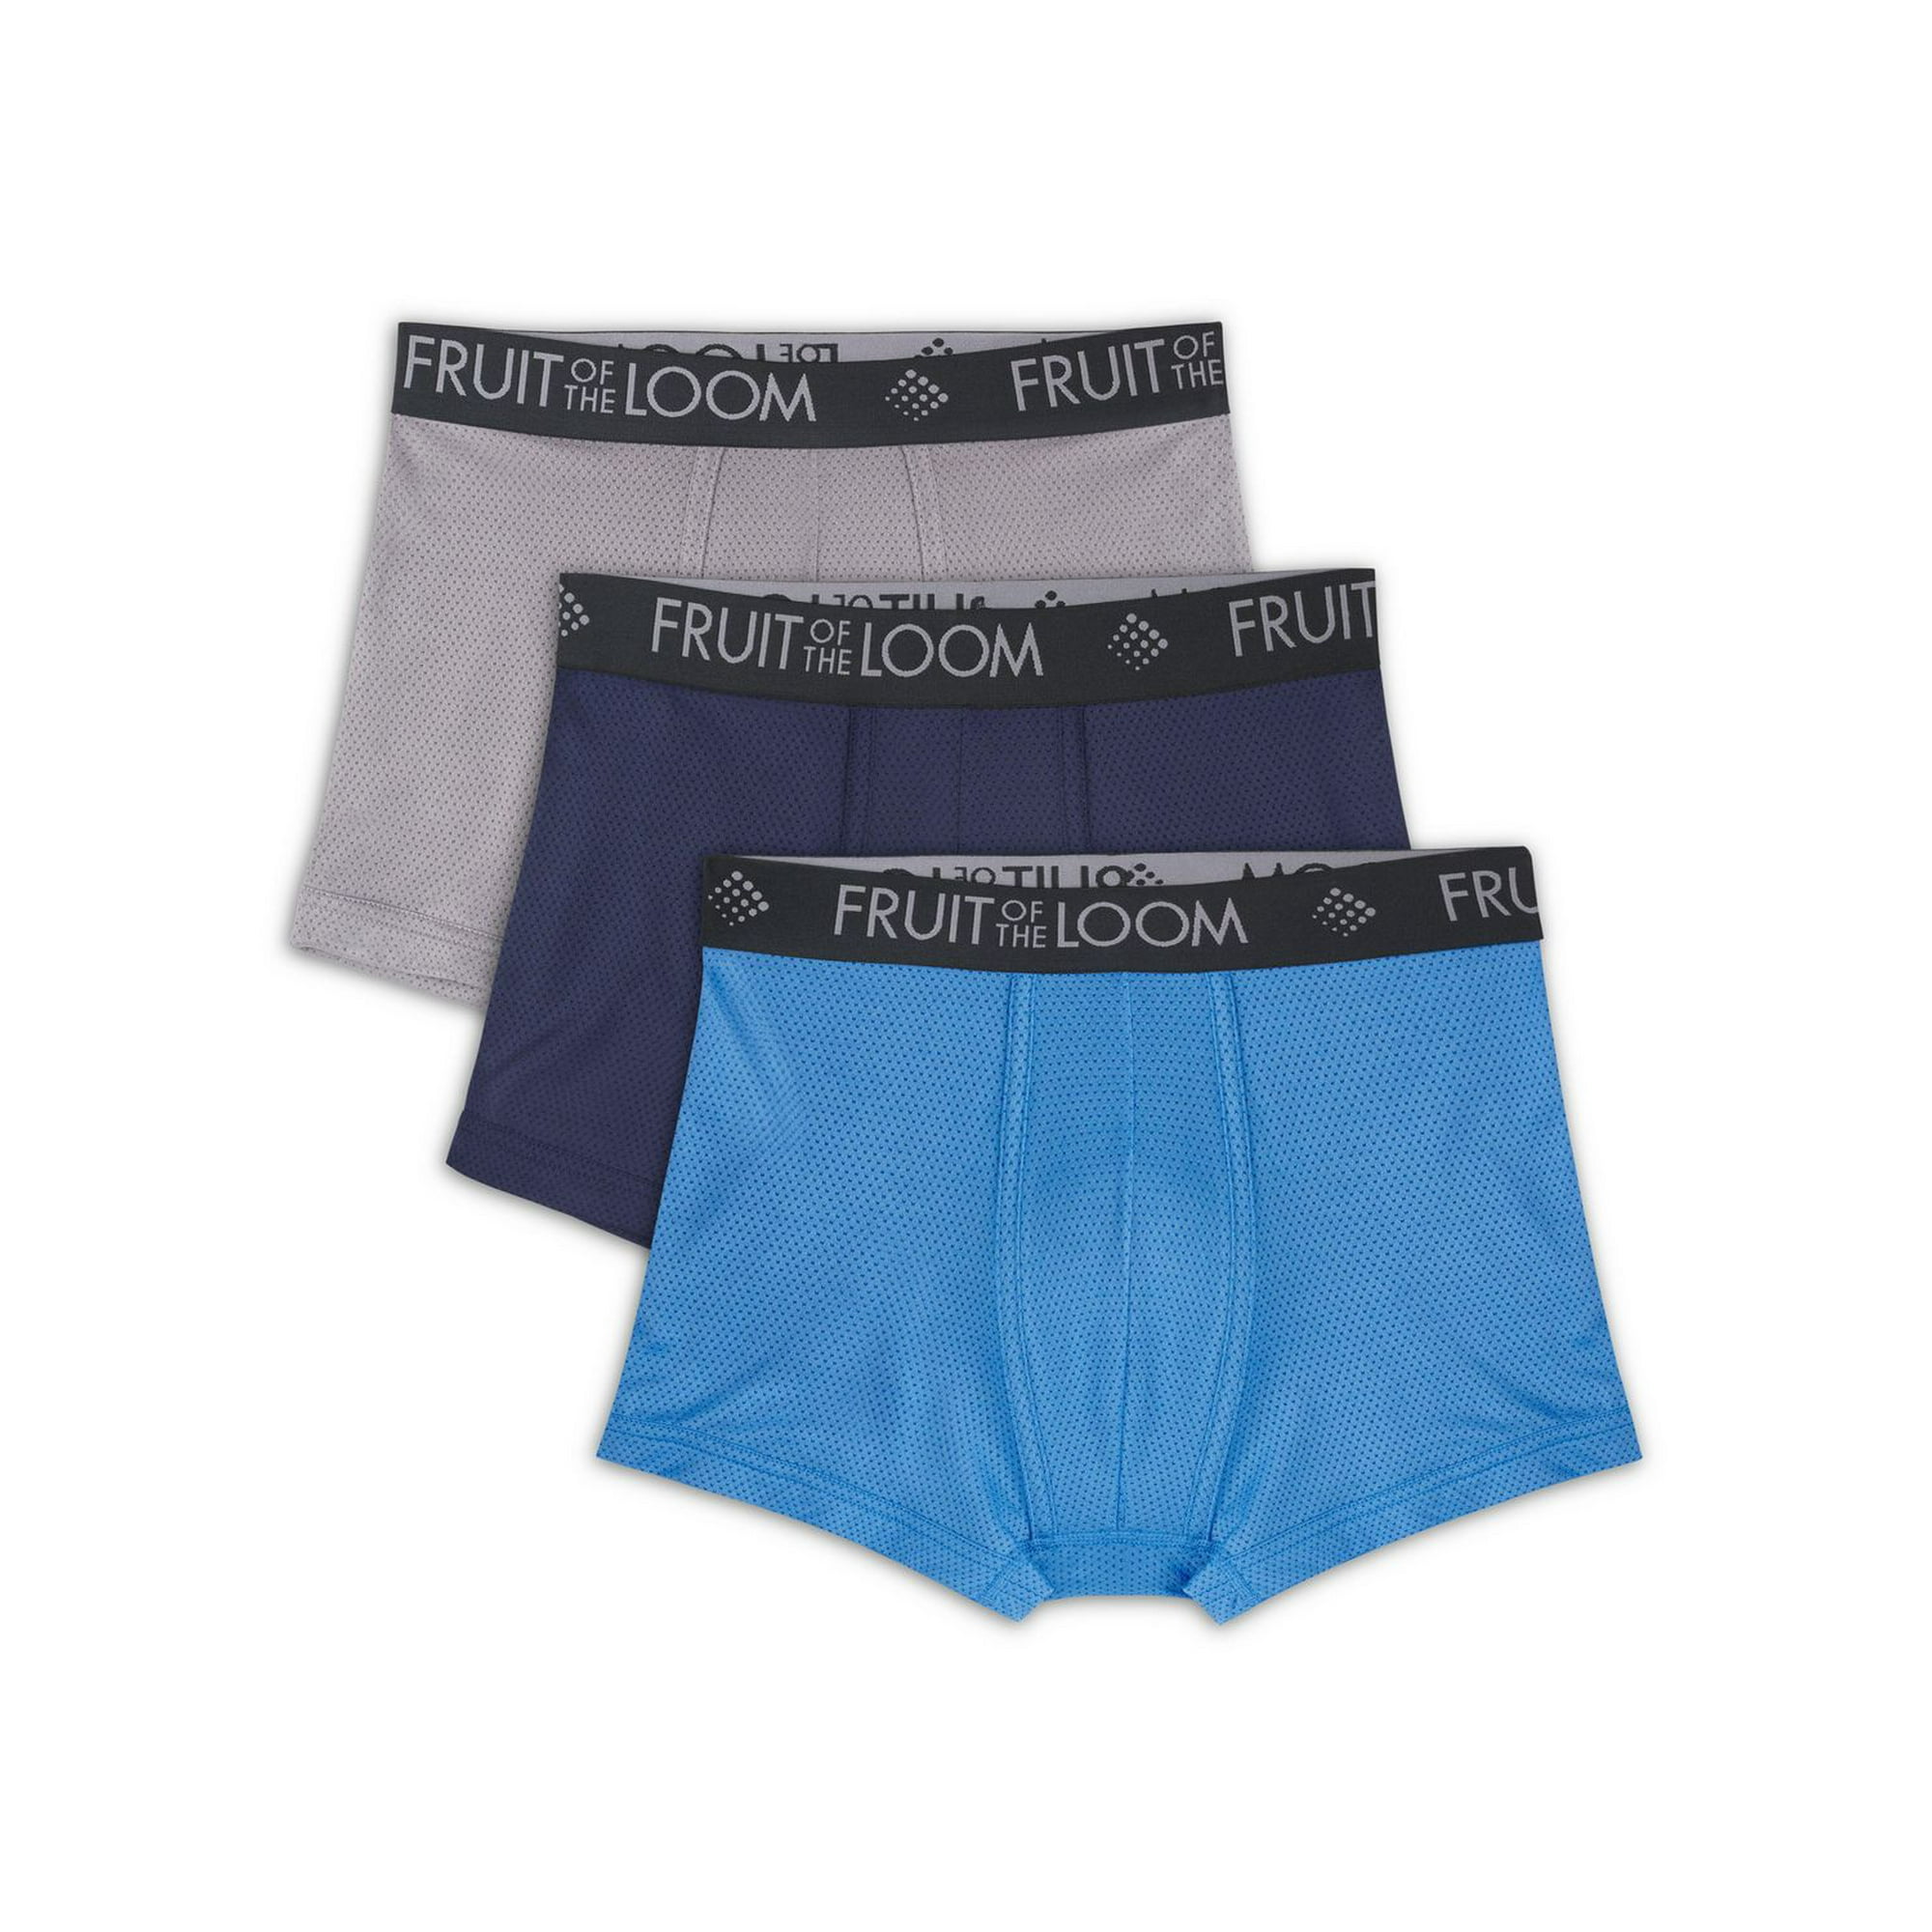 BIG MAN FRUIT OF THE LOOM 3 Boxer Briefs Breathable MicroMesh Underwear